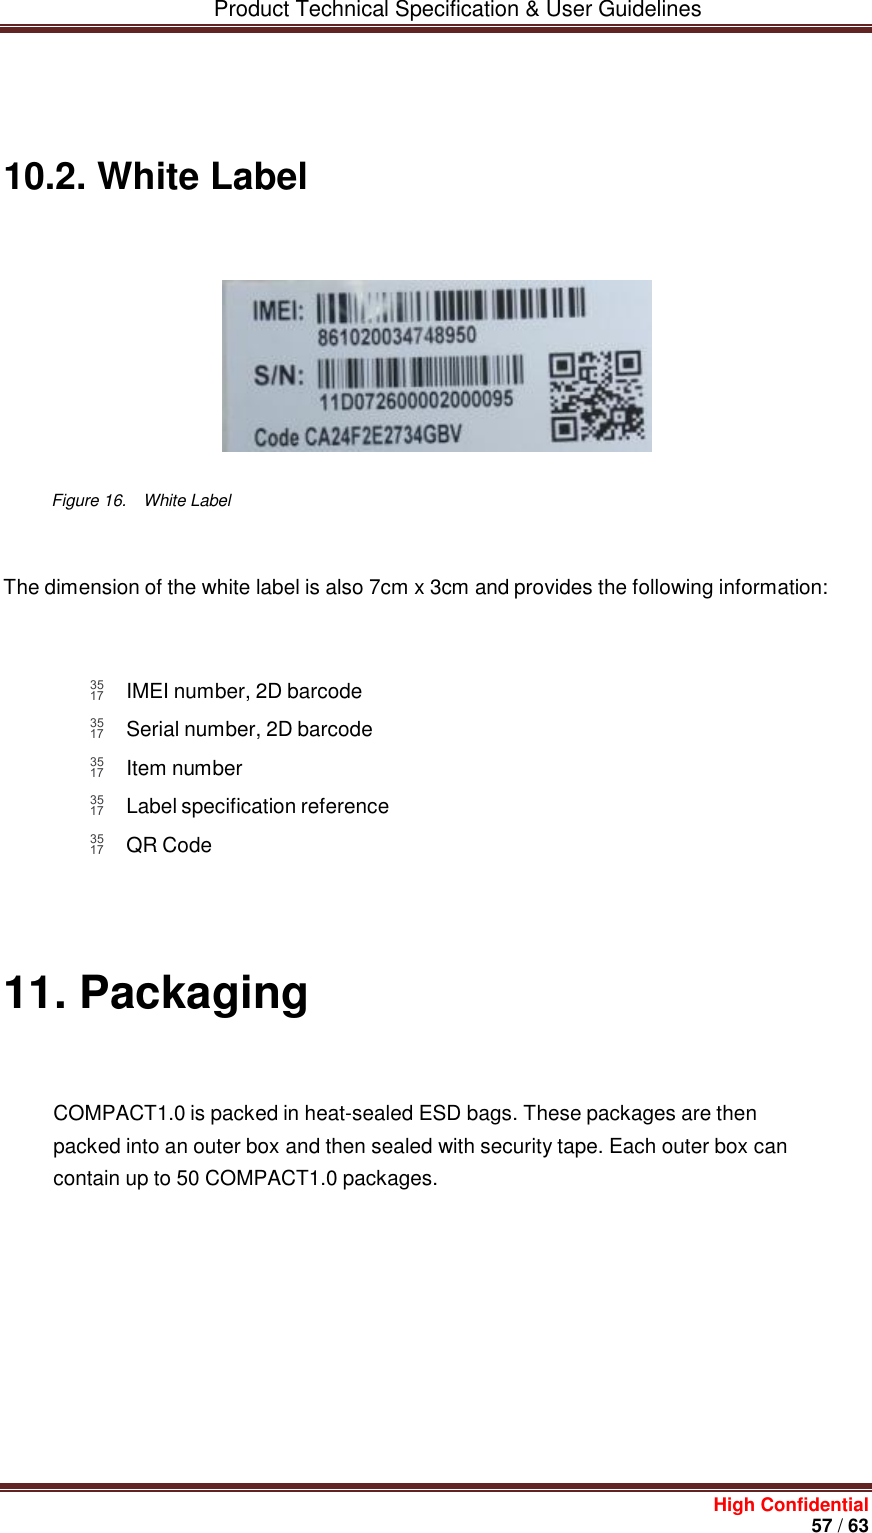         Product Technical Specification &amp; User Guidelines     High Confidential       57 / 63      10.2. White Label          Figure 16.    White Label   The dimension of the white label is also 7cm x 3cm and provides the following information:     IMEI number, 2D barcode  Serial number, 2D barcode  Item number  Label specification reference  QR Code            11. Packaging    COMPACT1.0 is packed in heat-sealed ESD bags. These packages are then packed into an outer box and then sealed with security tape. Each outer box can contain up to 50 COMPACT1.0 packages.                  